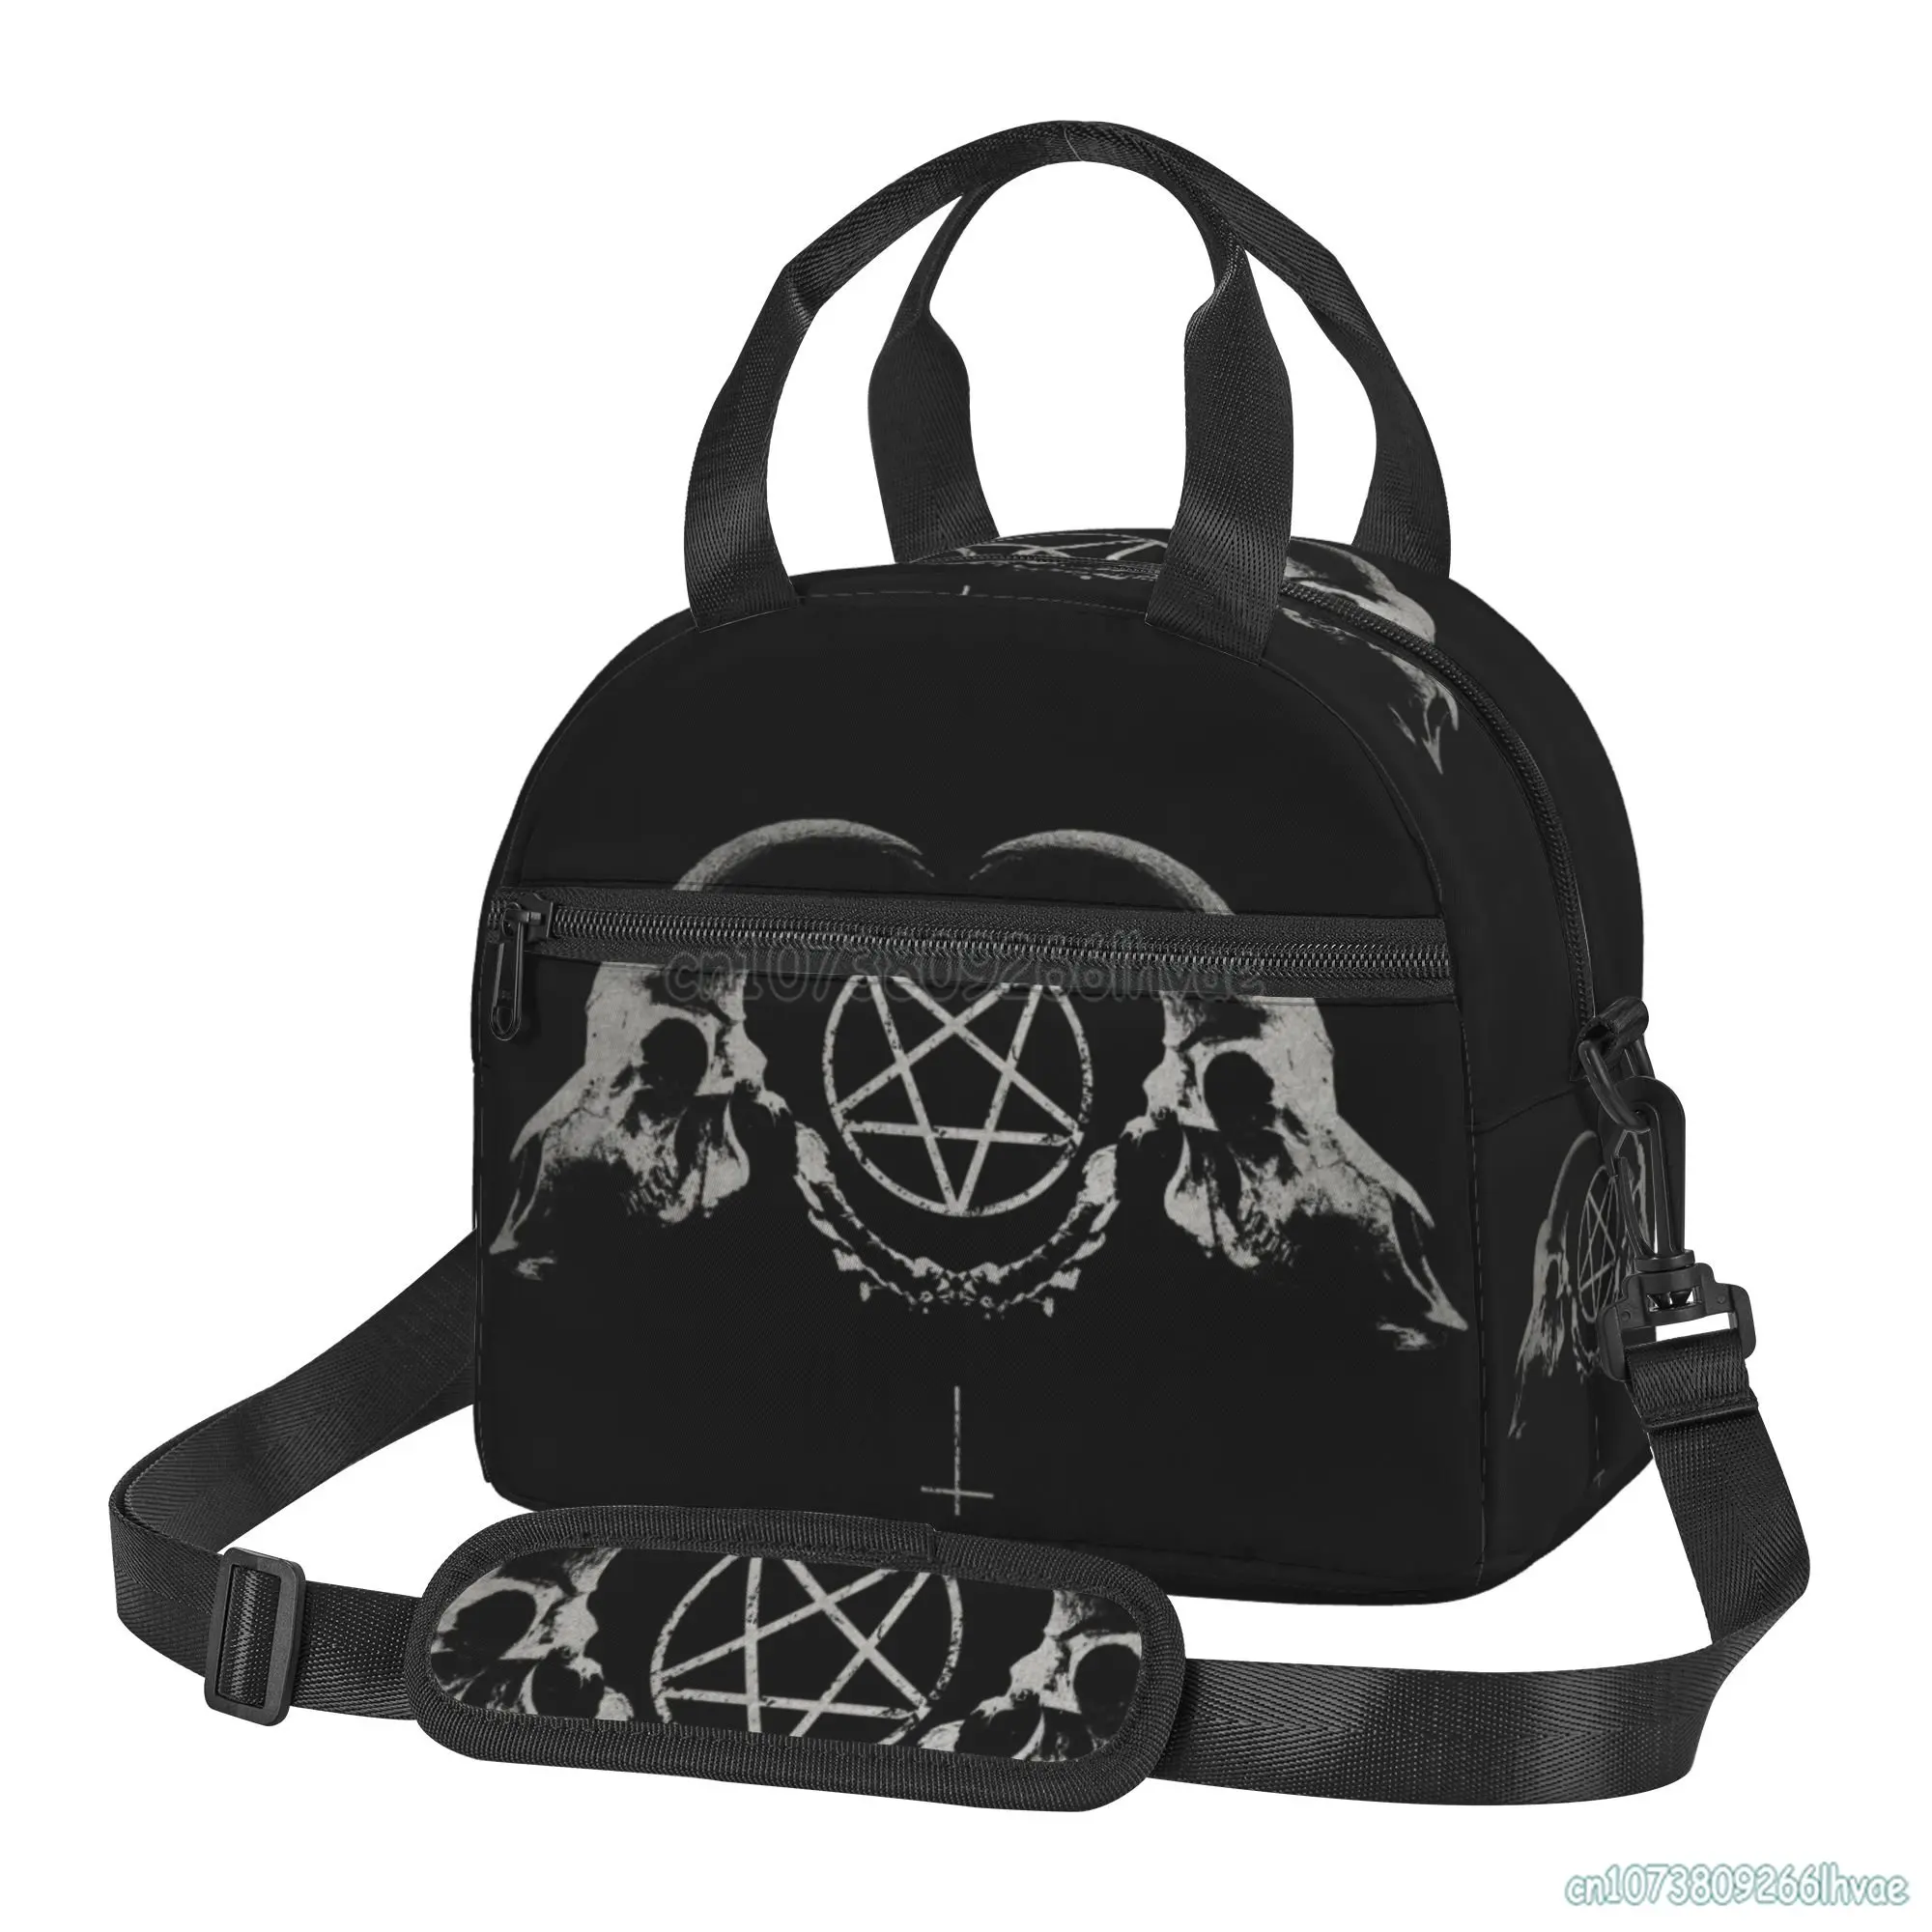 

Pentagram Satantic Occult Church of Satan Goat Goth Lunch Bags Reusable Insulated Bento Bag Thermal Cooler Food Bags for Work